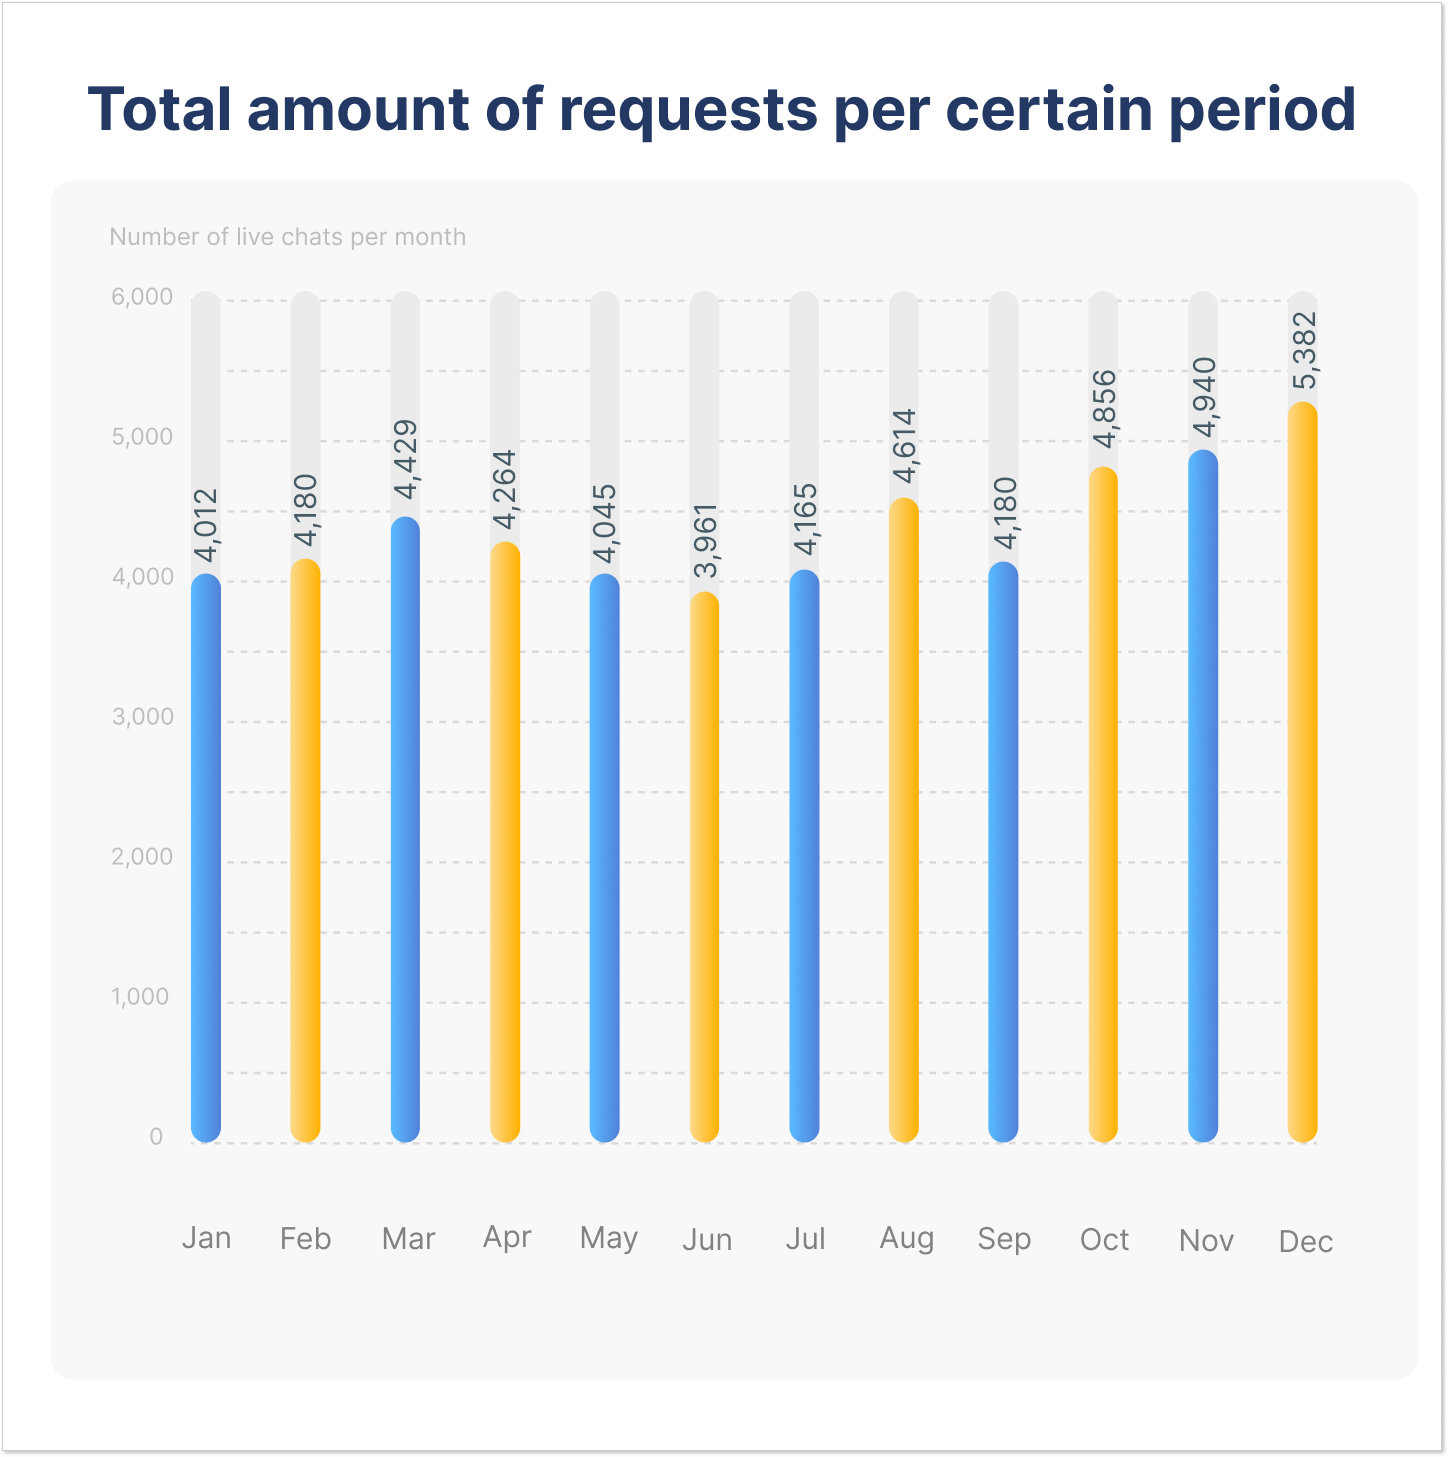 Total amount of requests per certain period